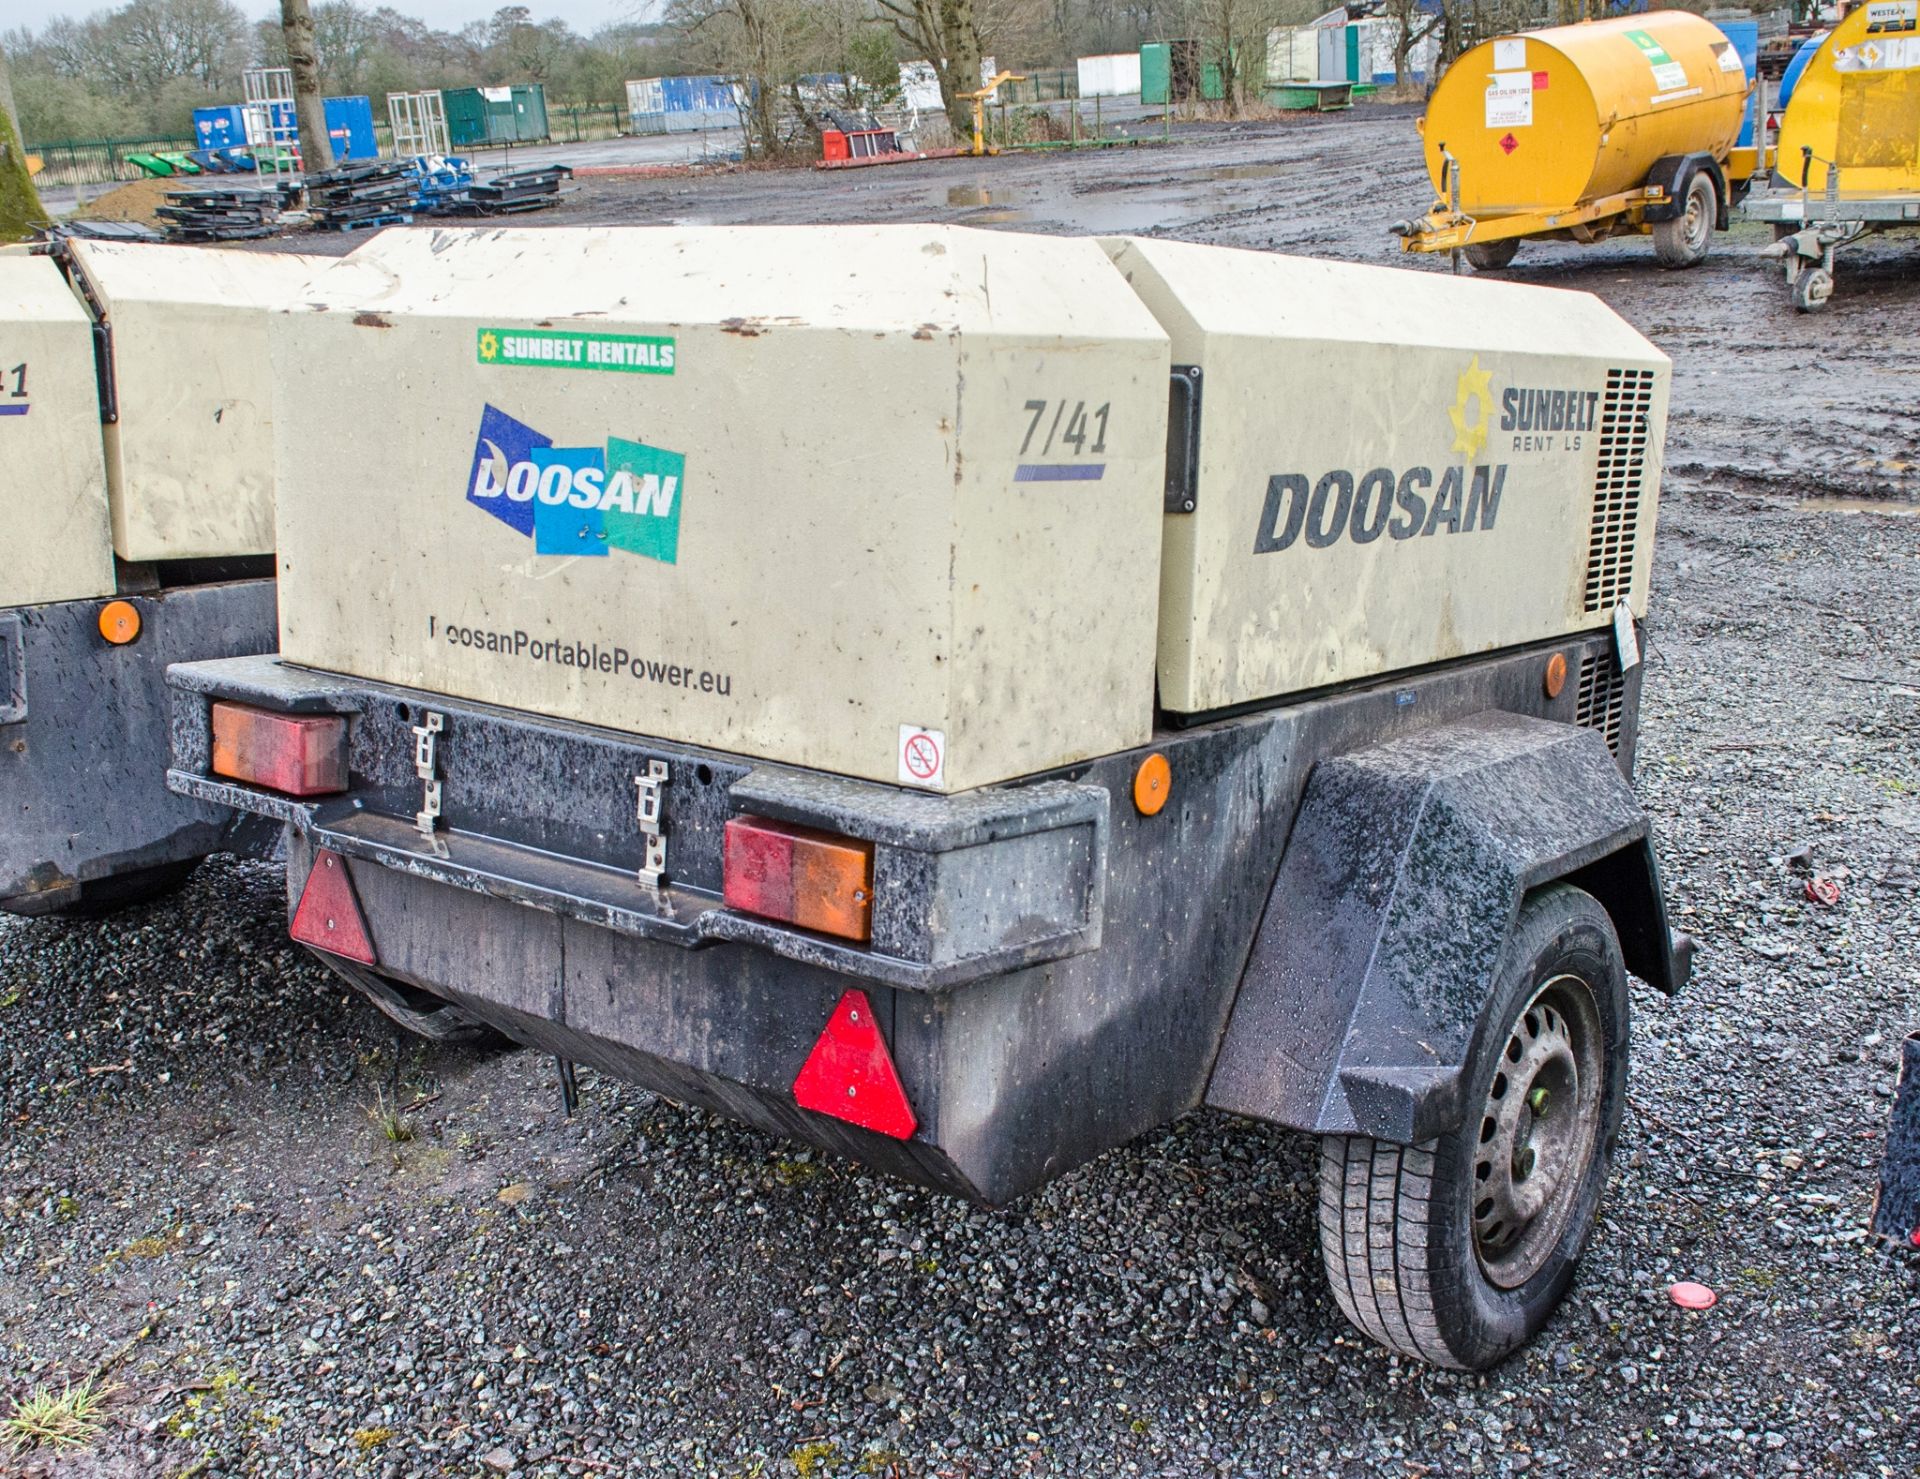 Doosan 7/41 diesel driven fast tow mobile air compressor Year: 2015 S/N: 433704 Recorded Hours: 2113 - Image 2 of 7